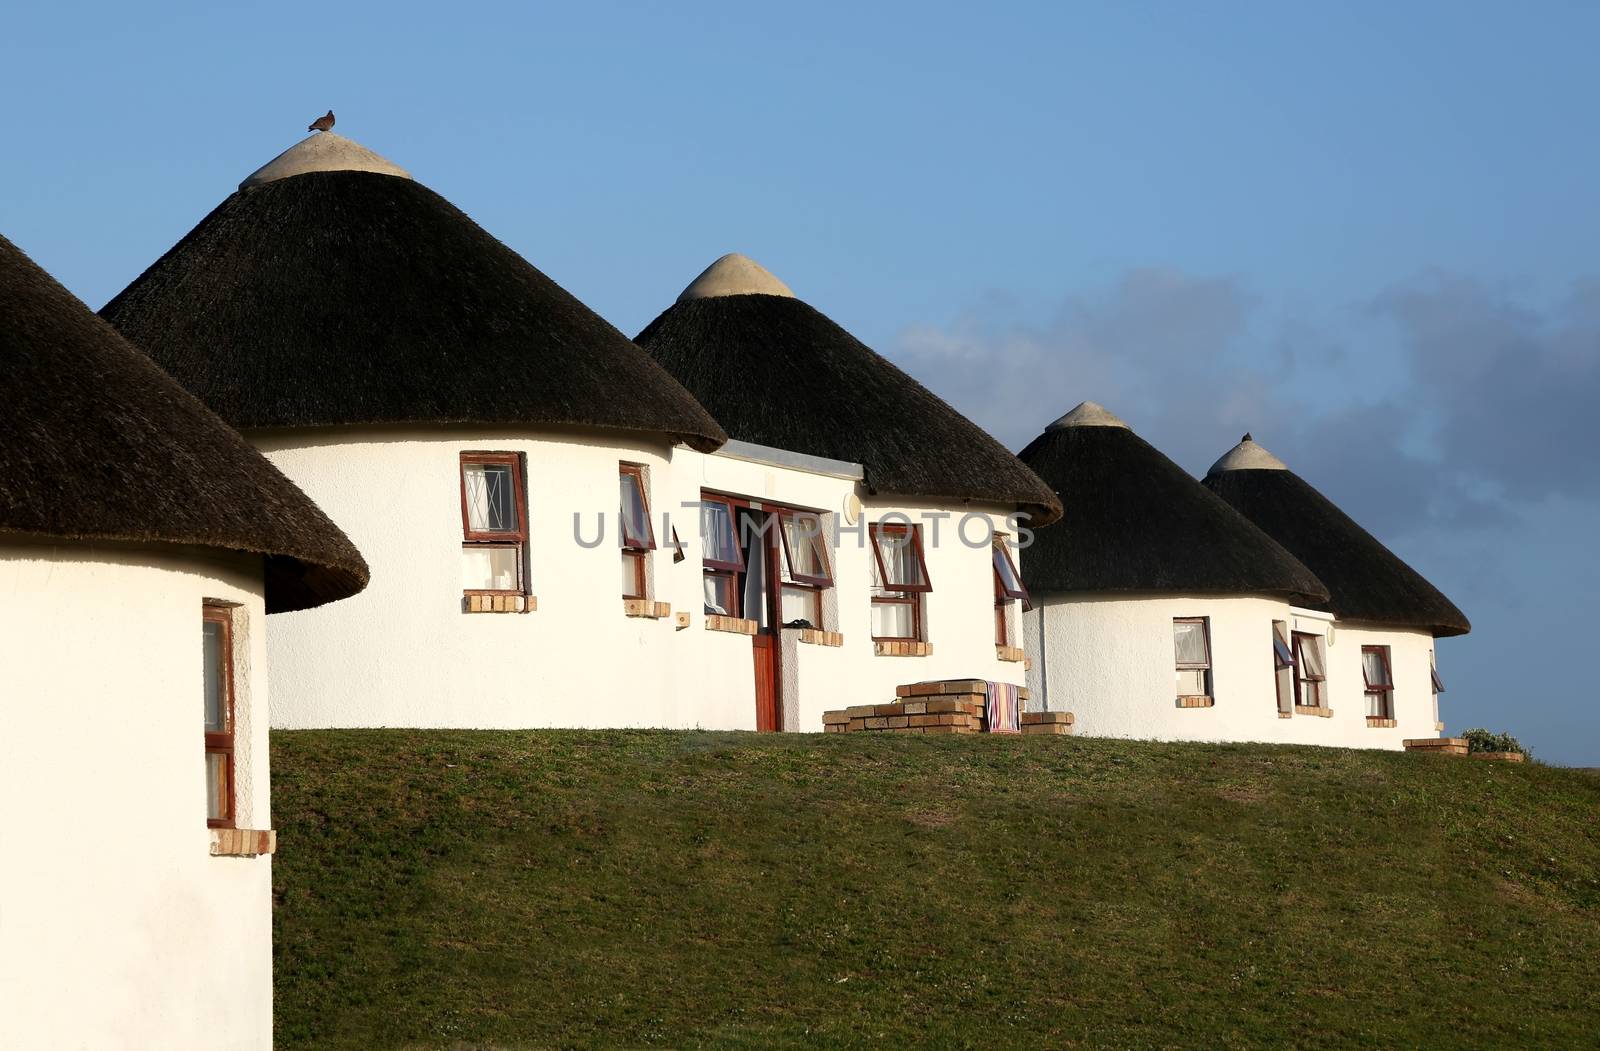 Quaint round holiday cottages with round walls and thatched roof